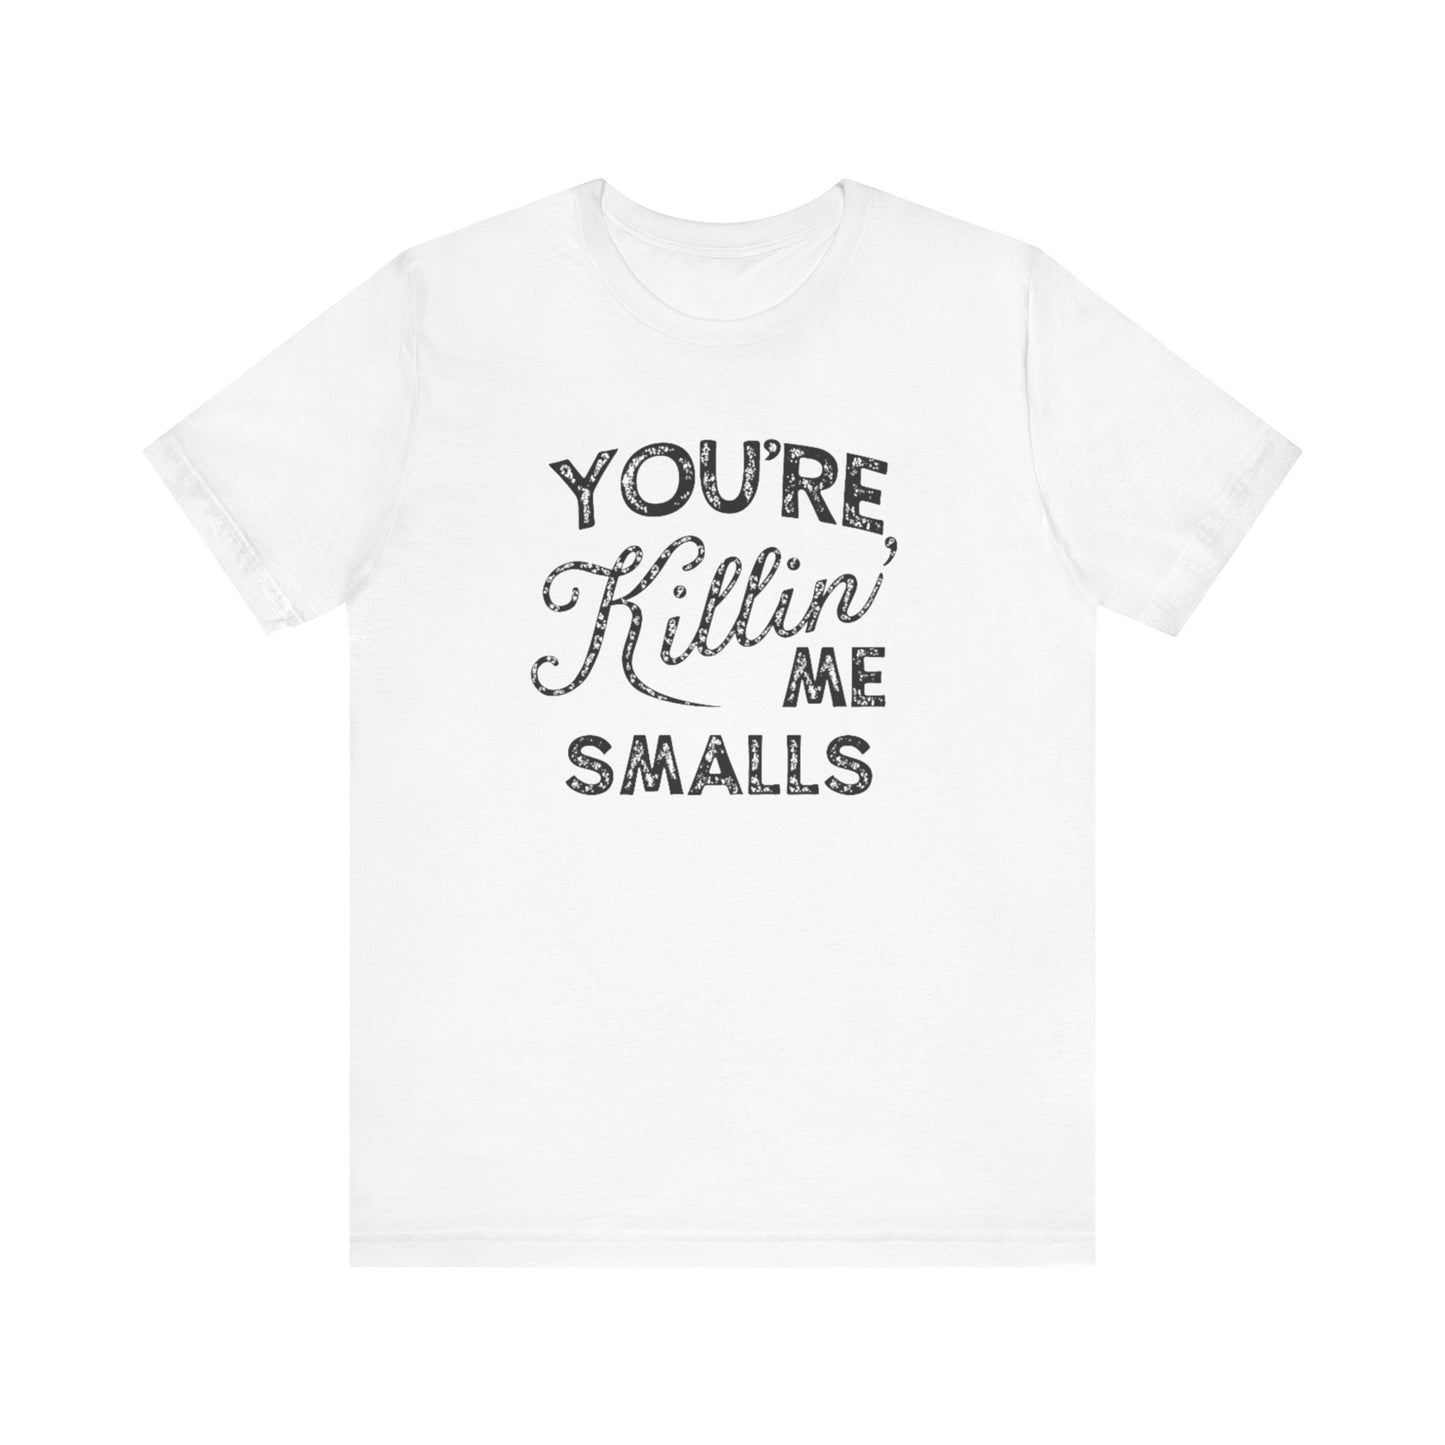 You're Killing Me Smalls  Unisex Jersey Short Sleeve Tee